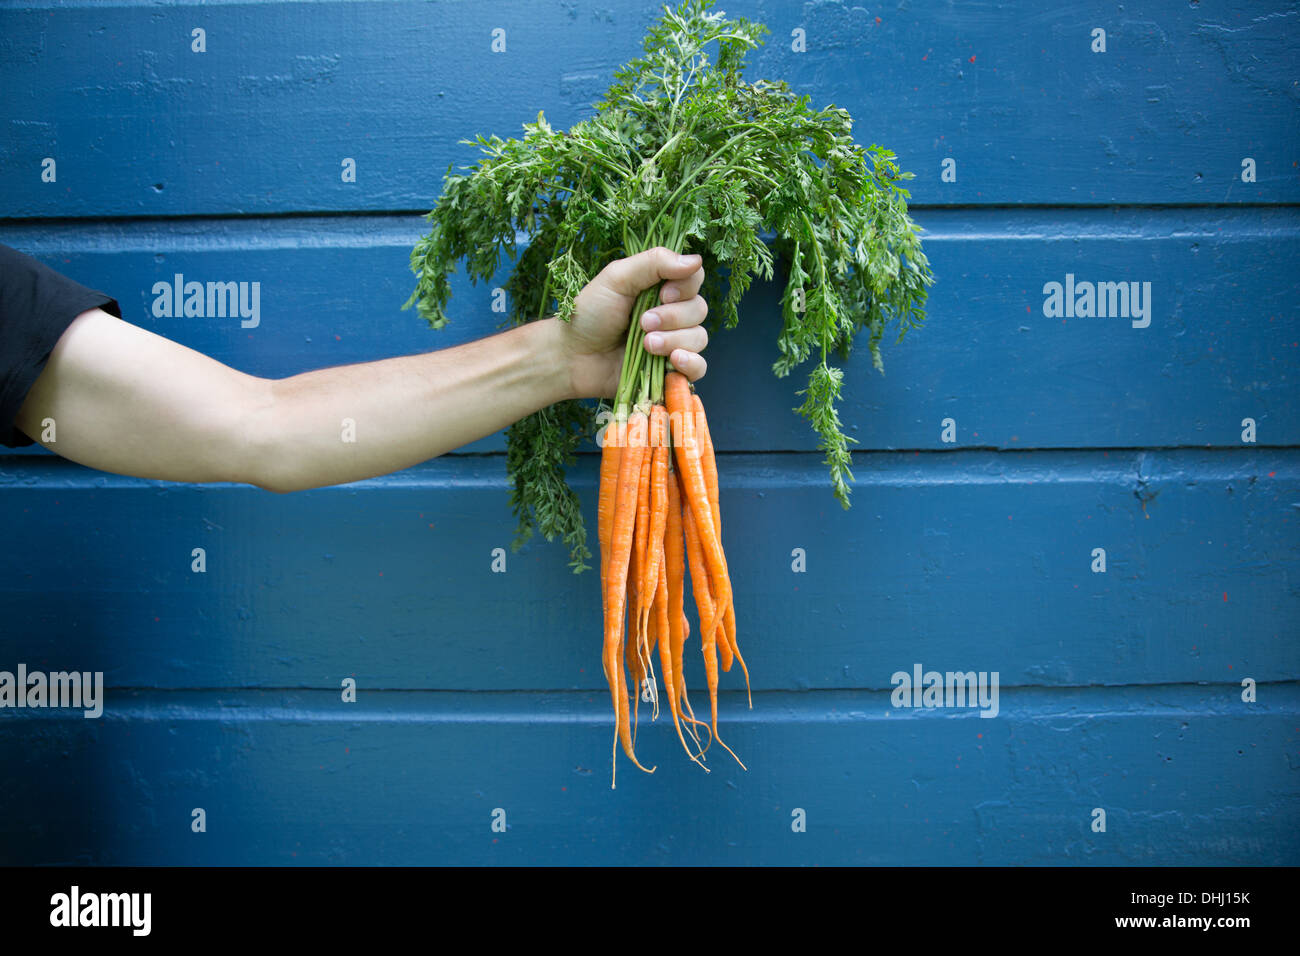 Man holding bunch of organic carrots Banque D'Images